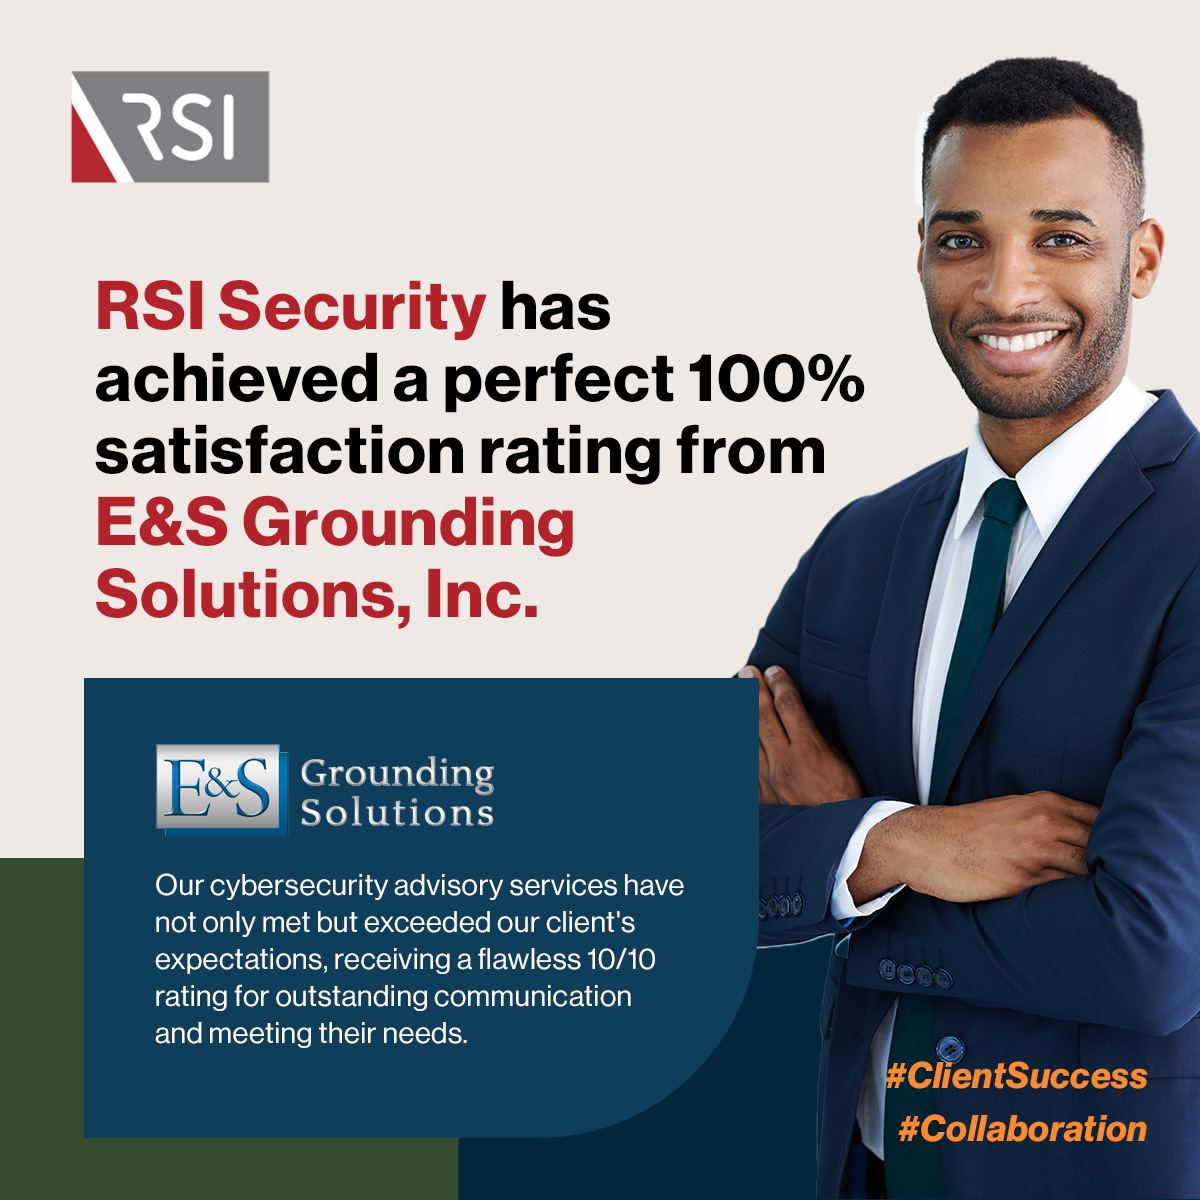 RSI Security earns a flawless 100% satisfaction rating from E&S Grounding Solutions, Inc. Our #Cybersecurity team's dedication to excellence shines through with a perfect 10/10 rating in communication and meeting our client's needs. Thank you for your trust! #RSISecurity